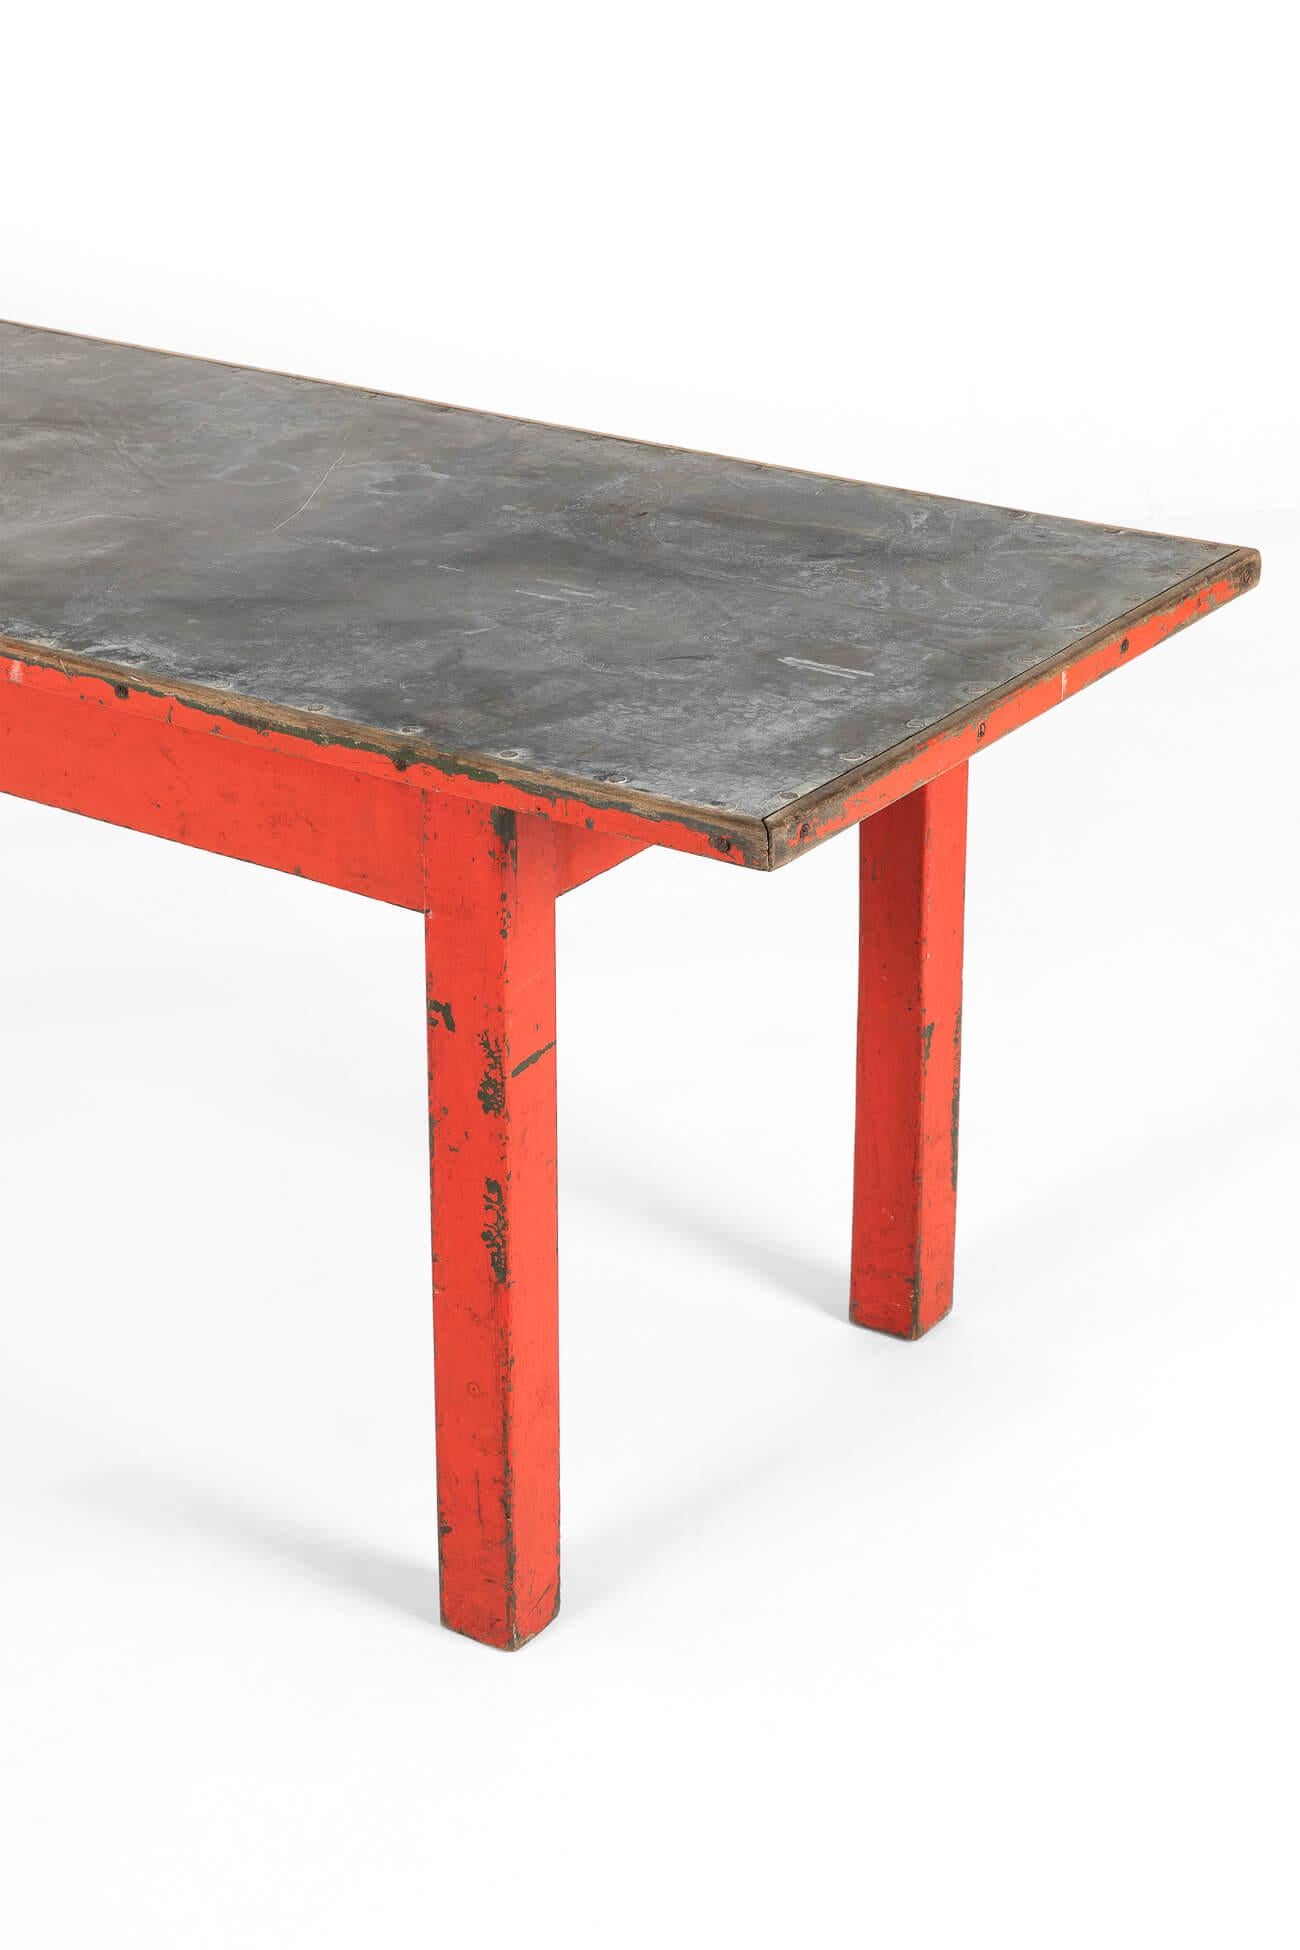 Hand-Crafted Zinc Top Table by C.W.S LTD For Sale